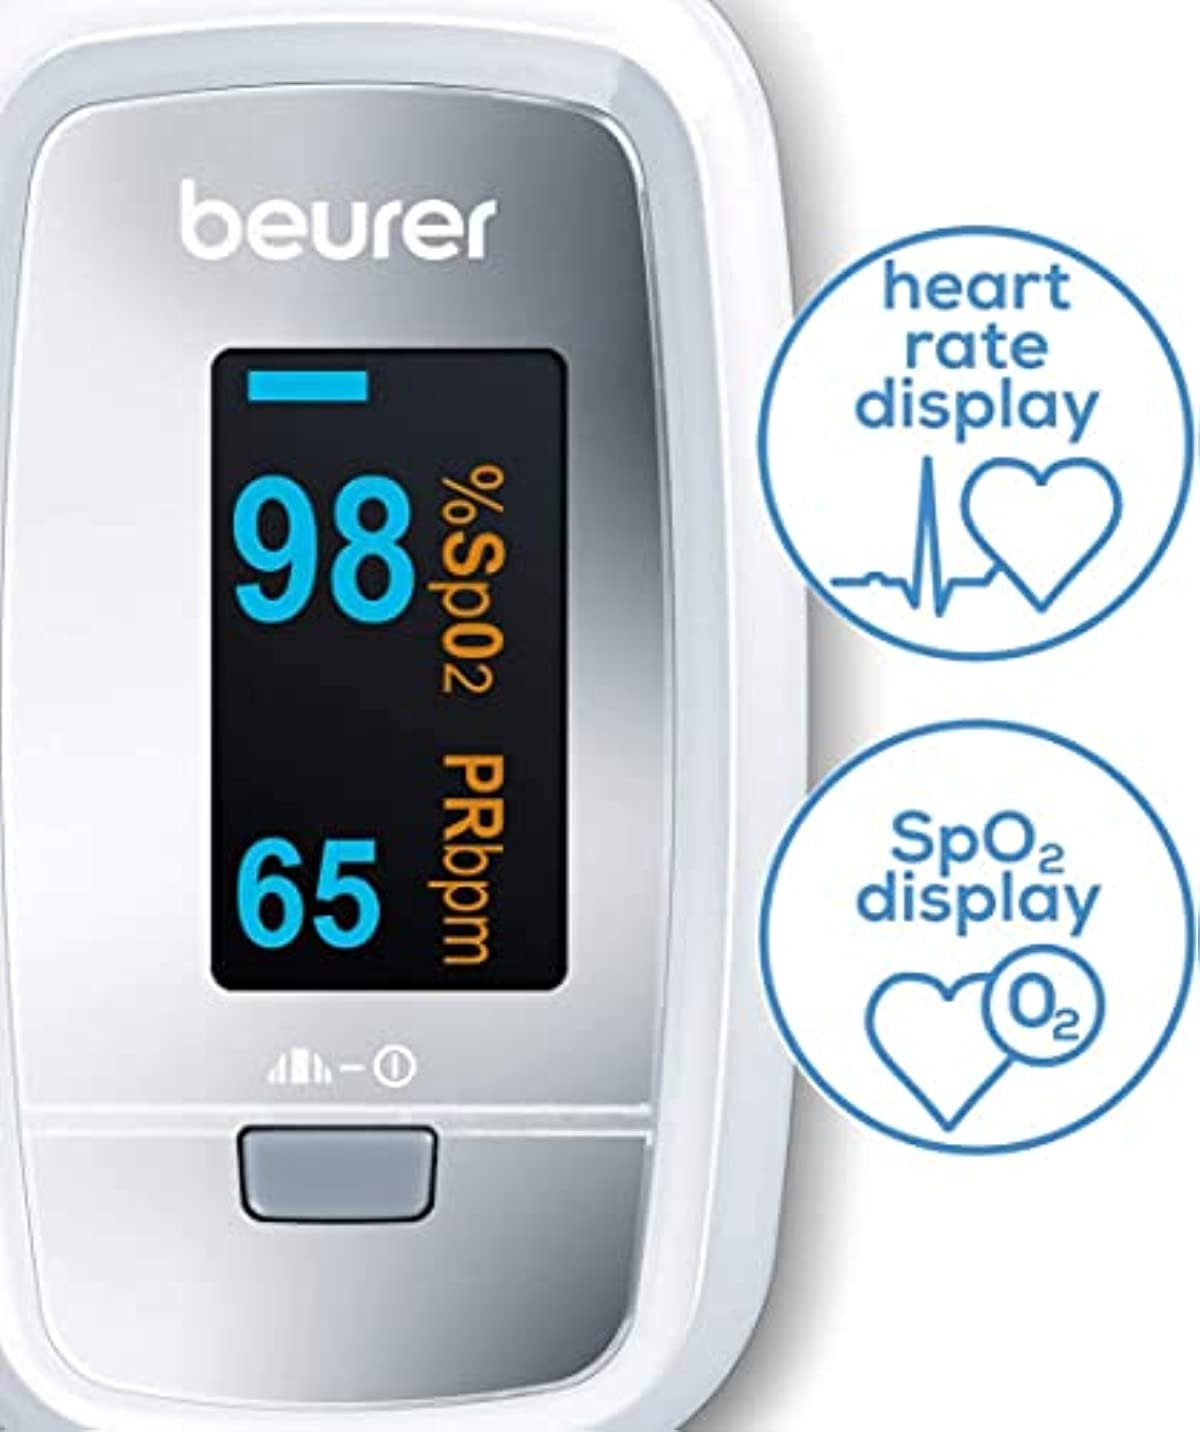 Beurer PO30 Fingertip Pulse Oximeter with 4 Color Display Formats, Lanyard, Protective Storage Bag, and Batteries – Blood Oxygen Saturation Monitor with Heart Rate, Oxygen Meter Finger Pulse Oximeter